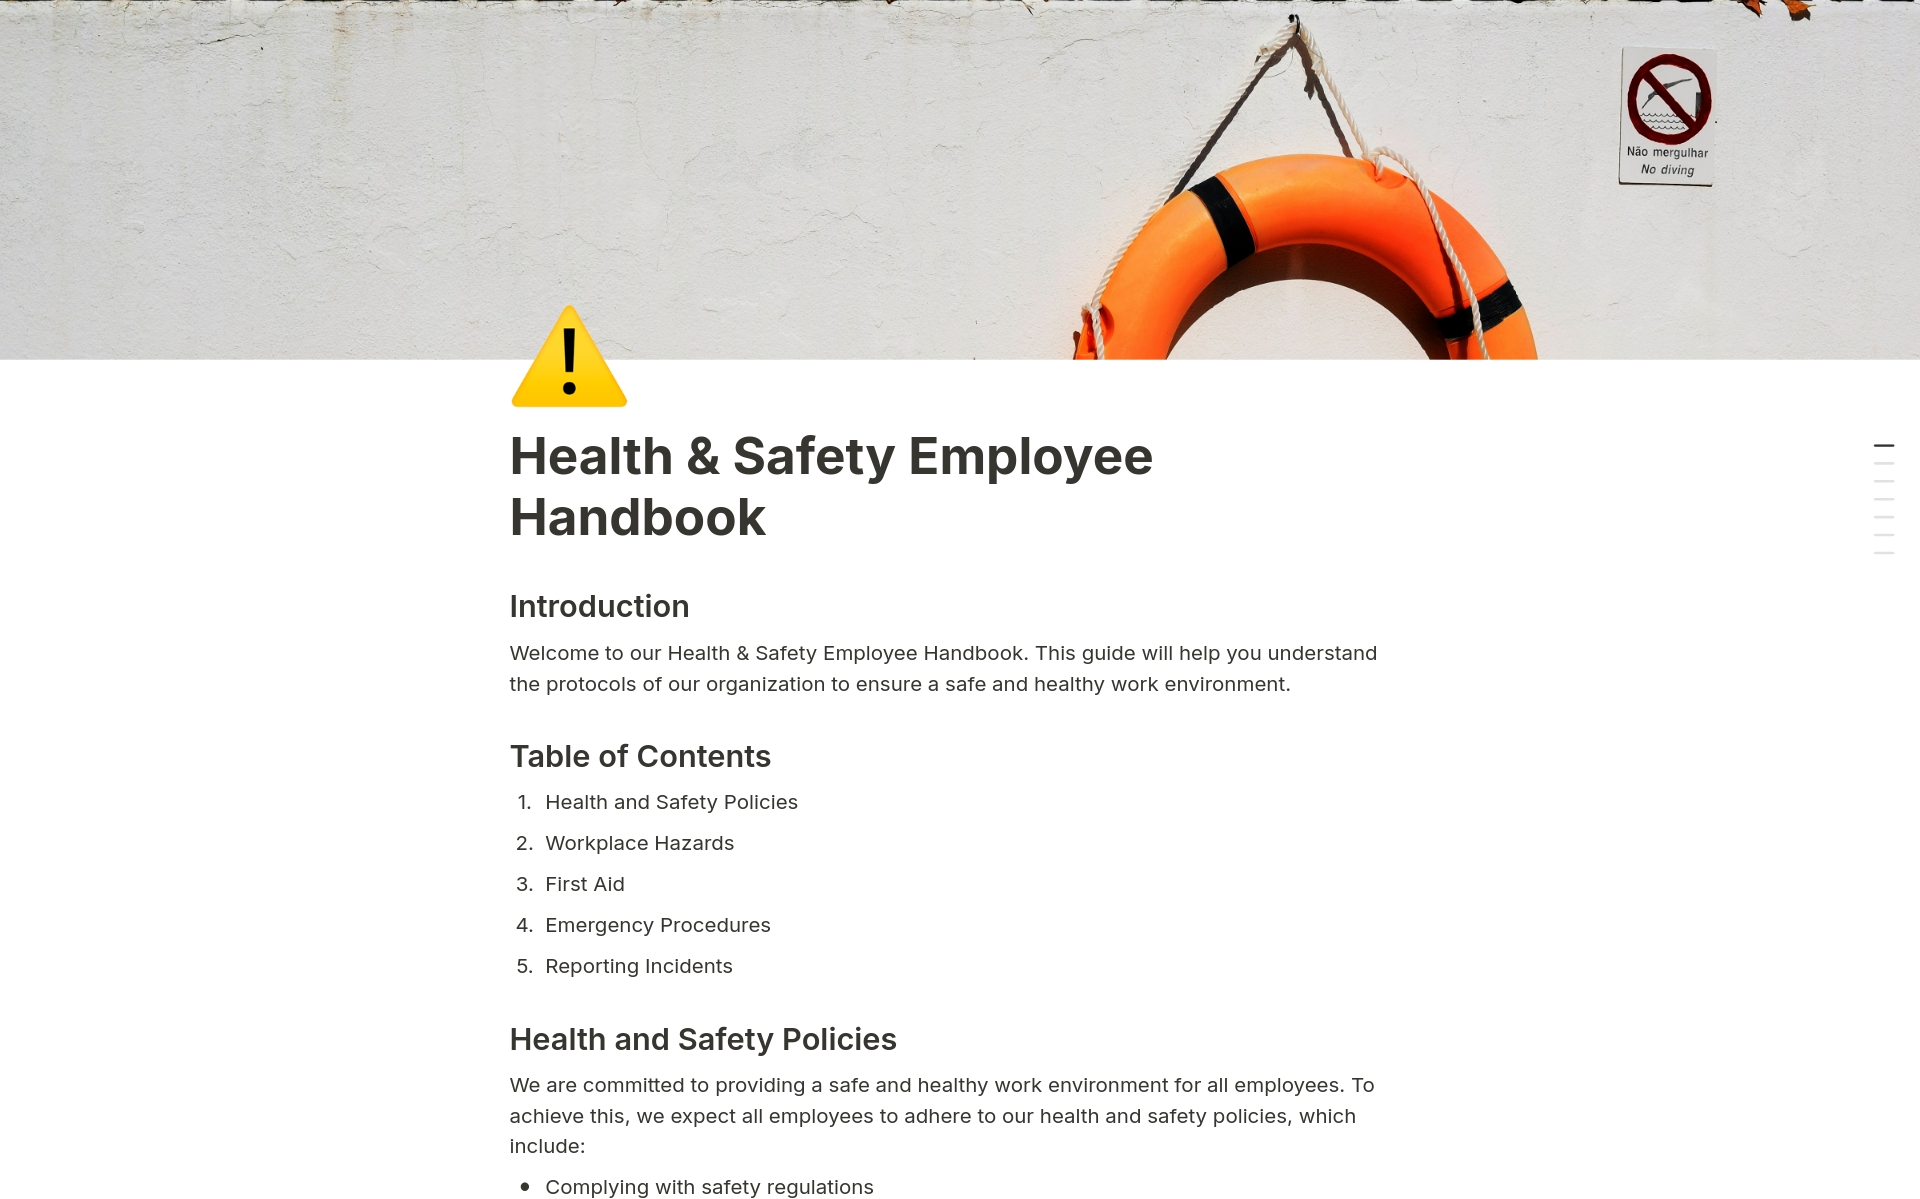 Guide for employees on health and safety policies, workplace safety protocols, and emergency procedures.